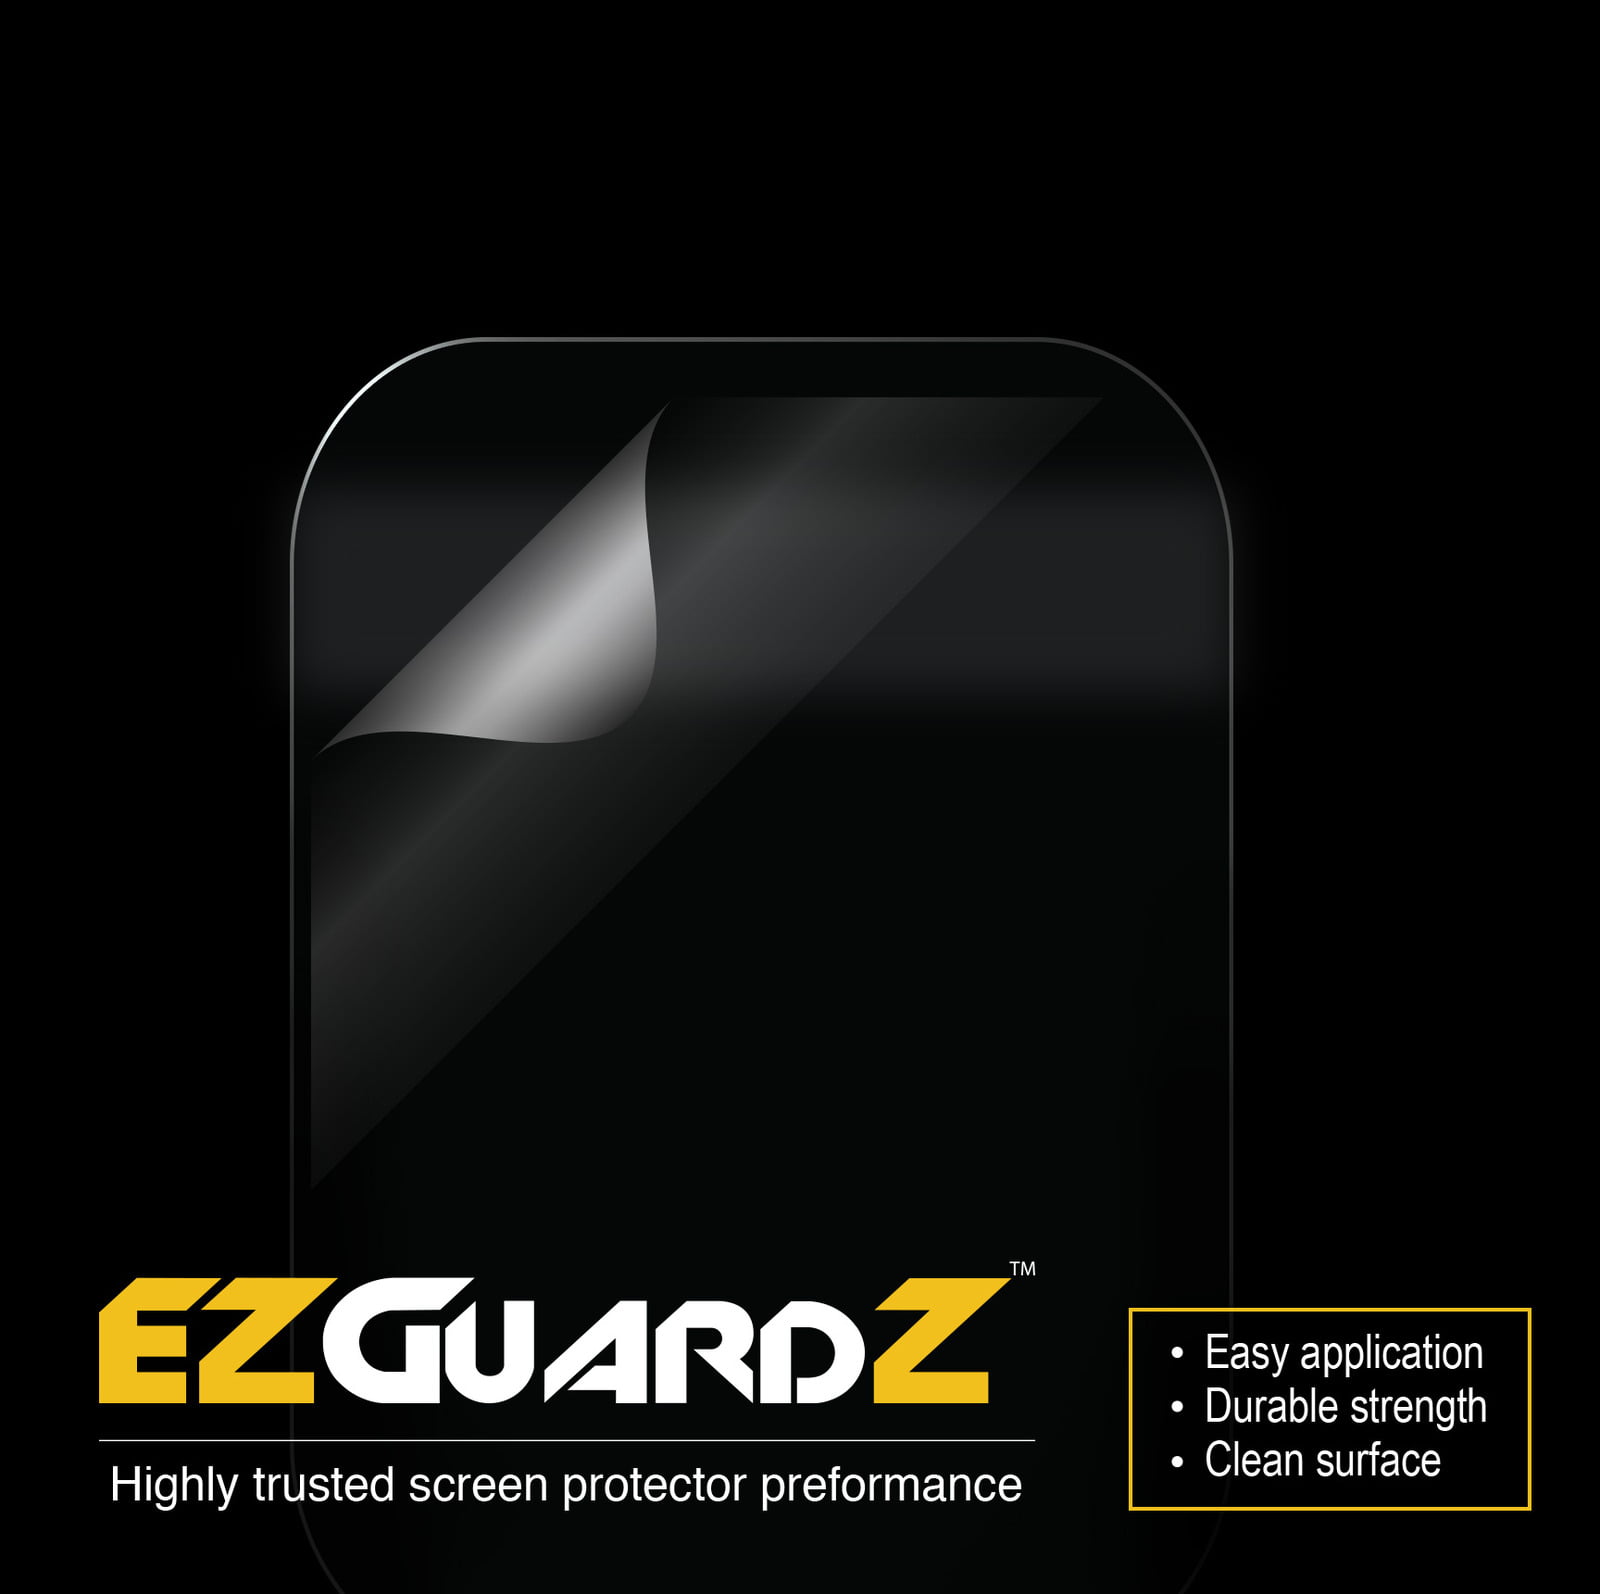 1X EZguardz LCD Screen Protector Shield HD 1X For Alcatel OneTouch Pixi 7 Tablet 